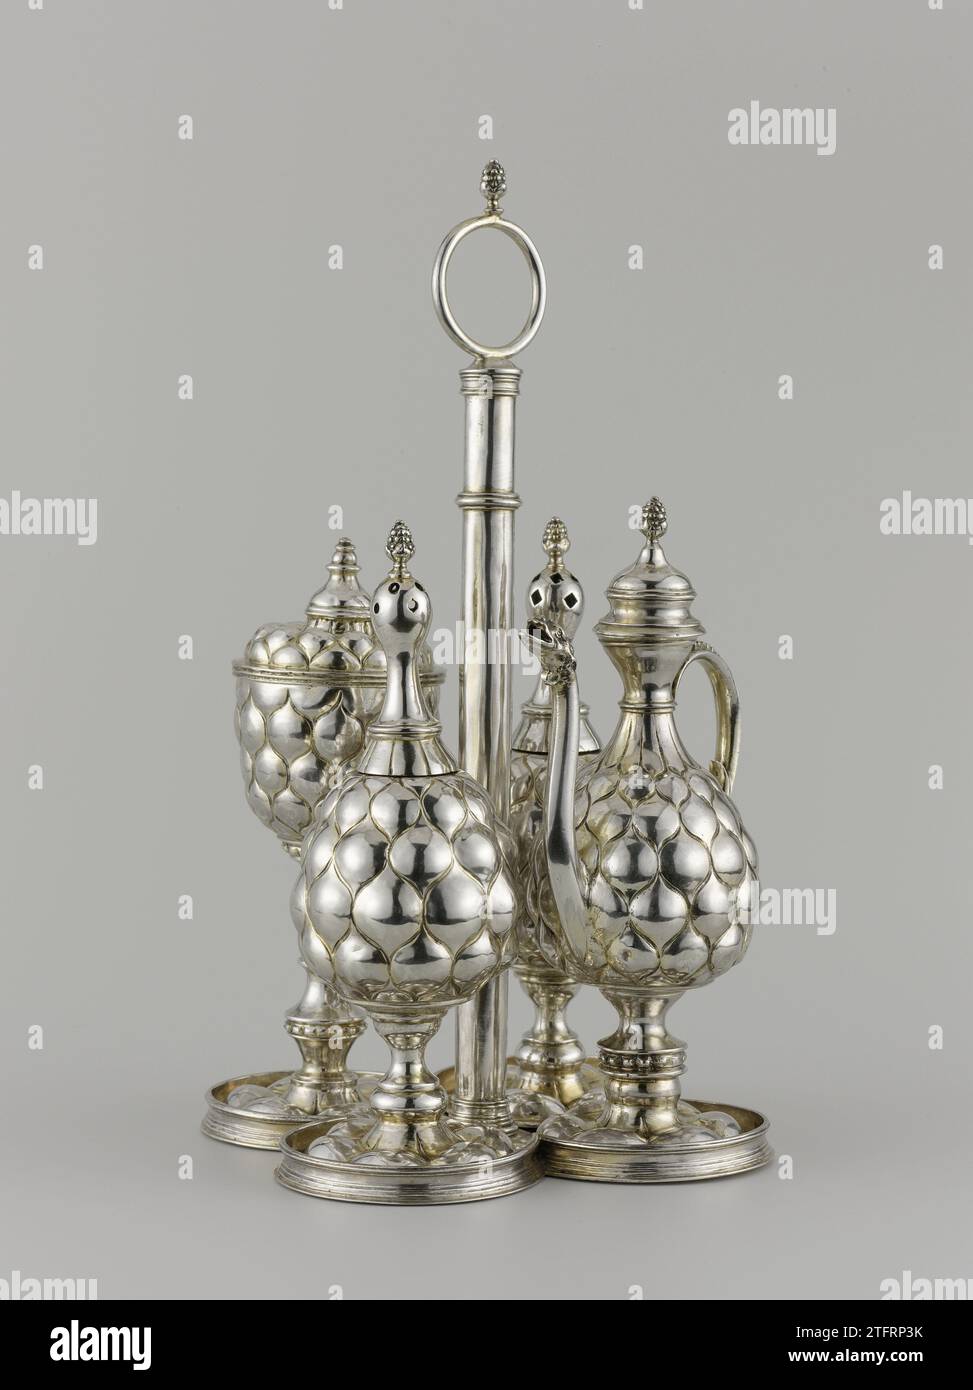 Zoutvat, belonging to a spice service, Anthonie Grill (attributed to), 1642 Zoutvat belonging to a spice service. The salt vessel rests on a six -lobe base on which there is a stacking of a kndering edge between two mirroring vase shapes, a baluster, a vase shape and a kndering edge. Above the half-egg-shaped body that is decorated with drop-shaped bulges rises. These motifs also adorn the removable lid. The fairly flat outer part of it drops a little towards the center and then elevated itself in a multiple profiled button. The salt barrel has a fixed inner bin whose gilding is still in good Stock Photo